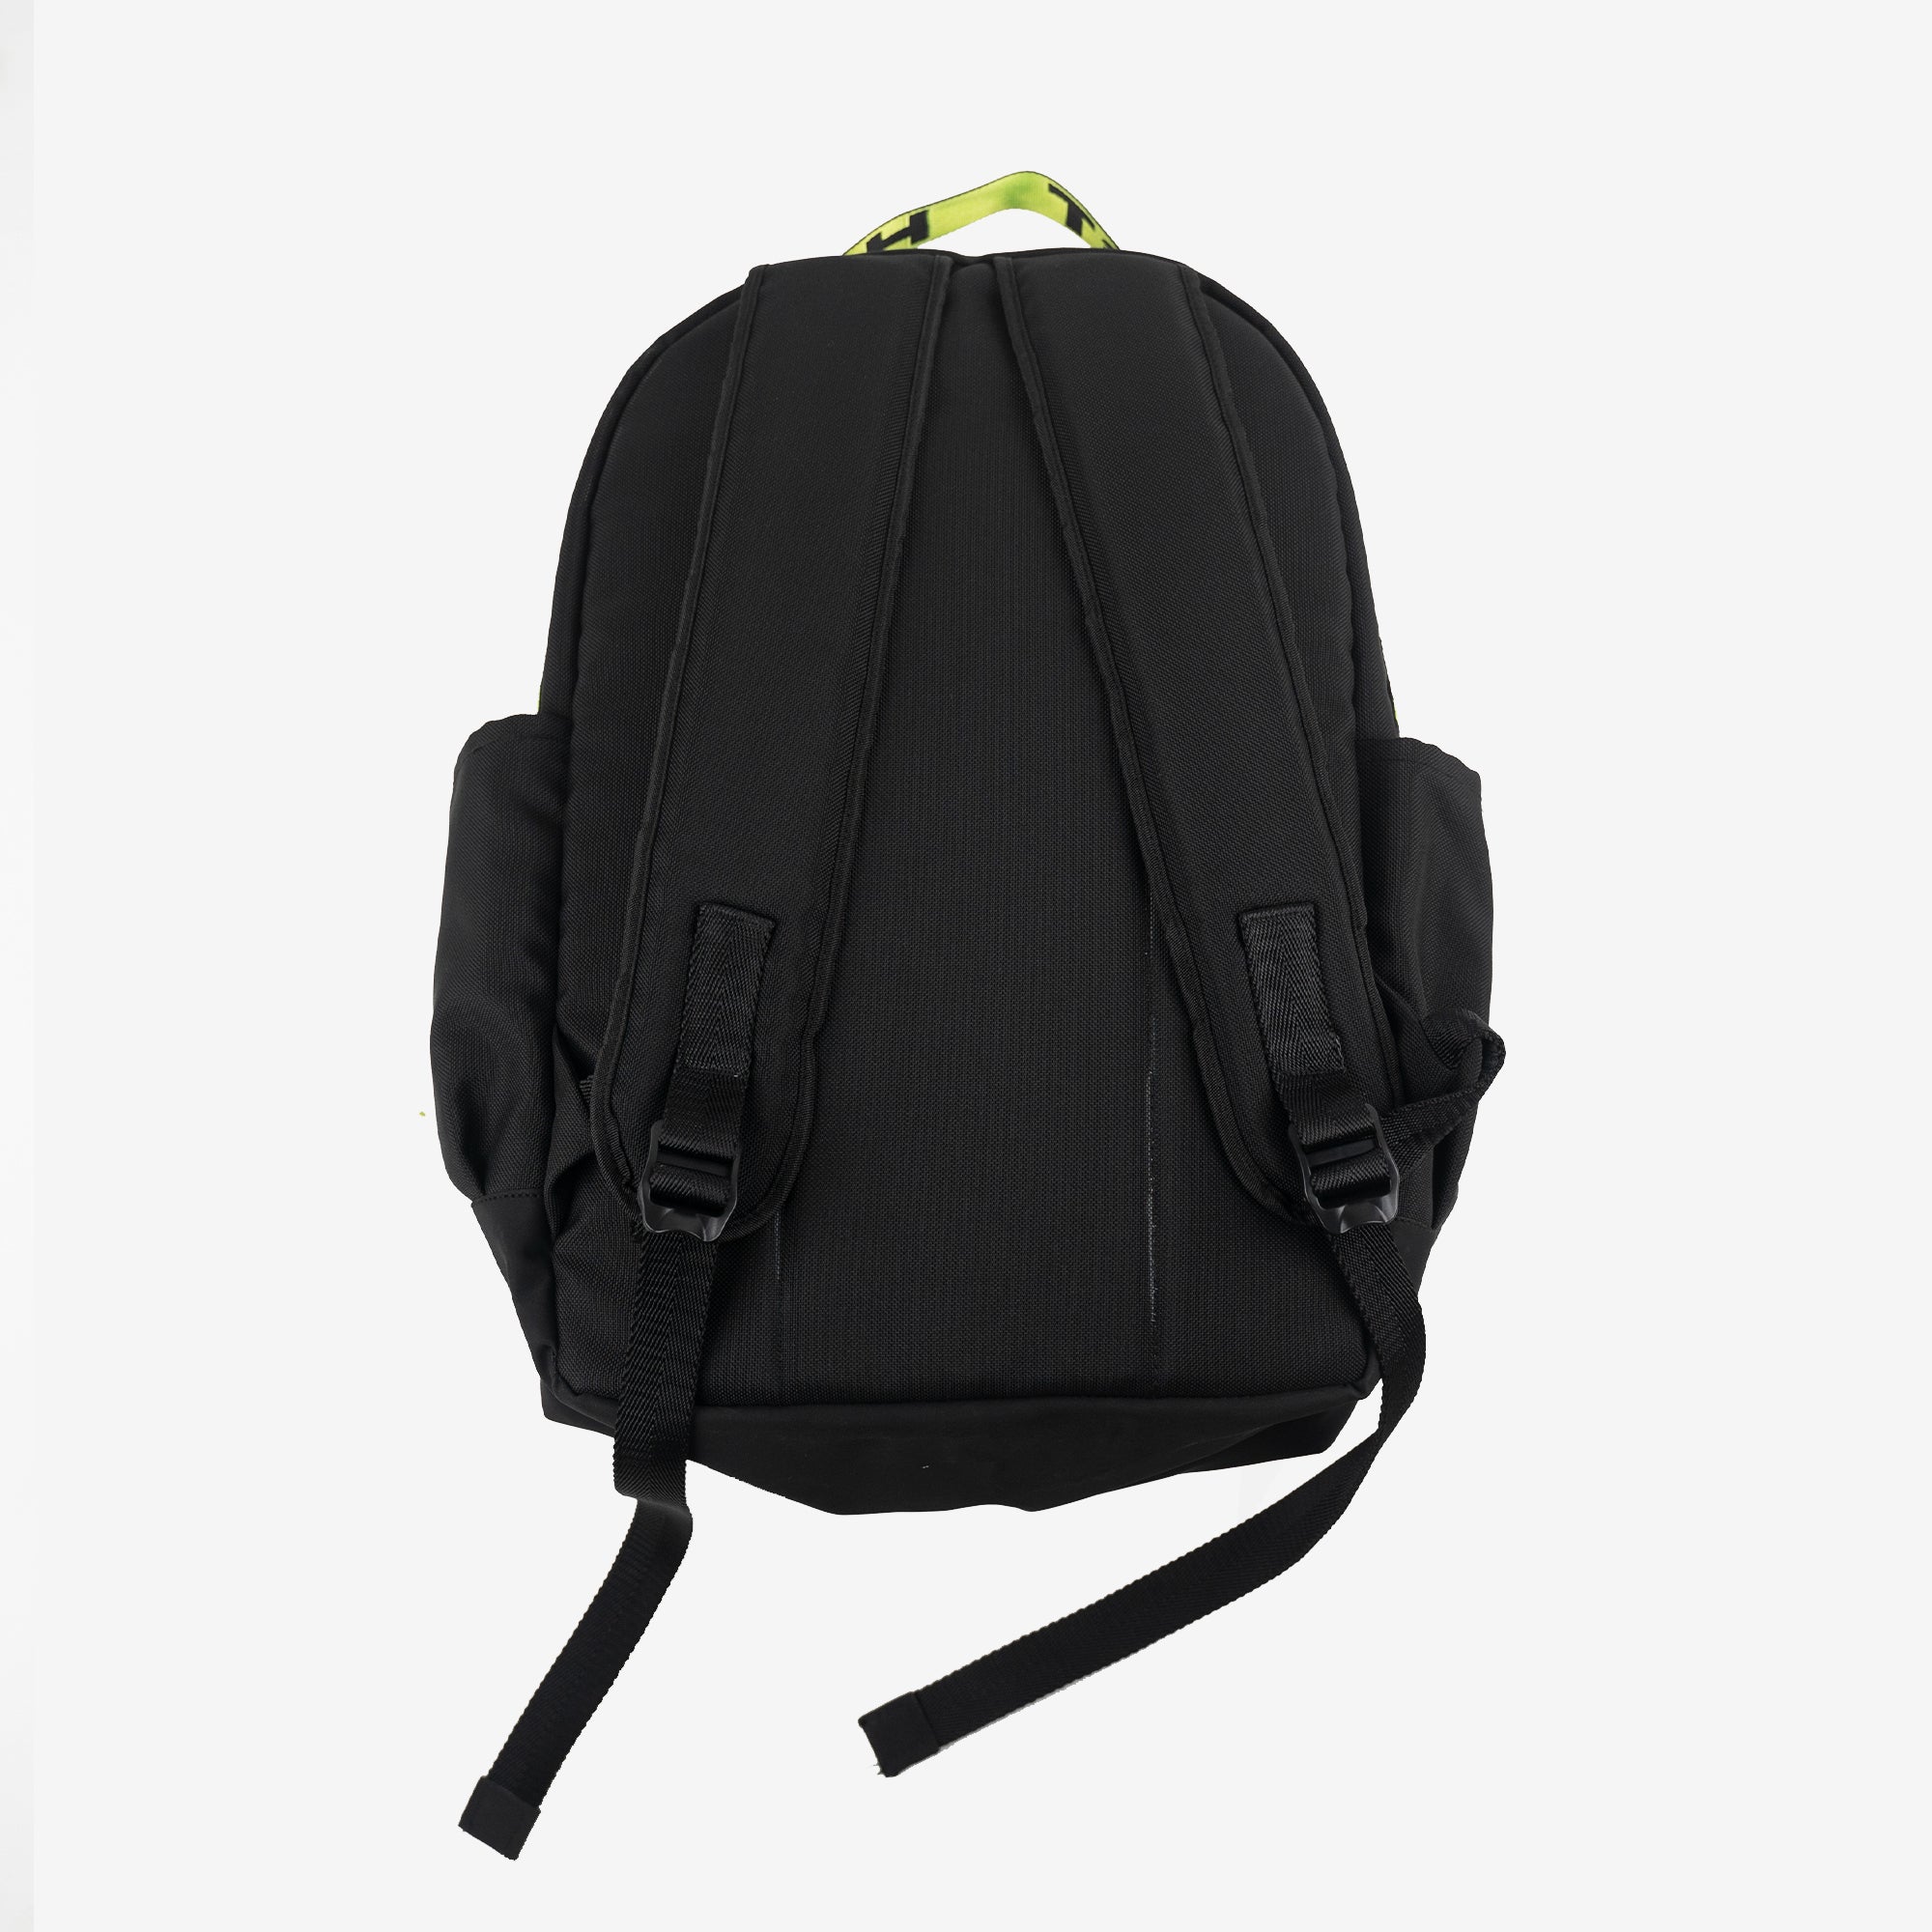 HALO LIMITED UTILITY BACKPACK (BLACK & ELECTRIC GREEN)